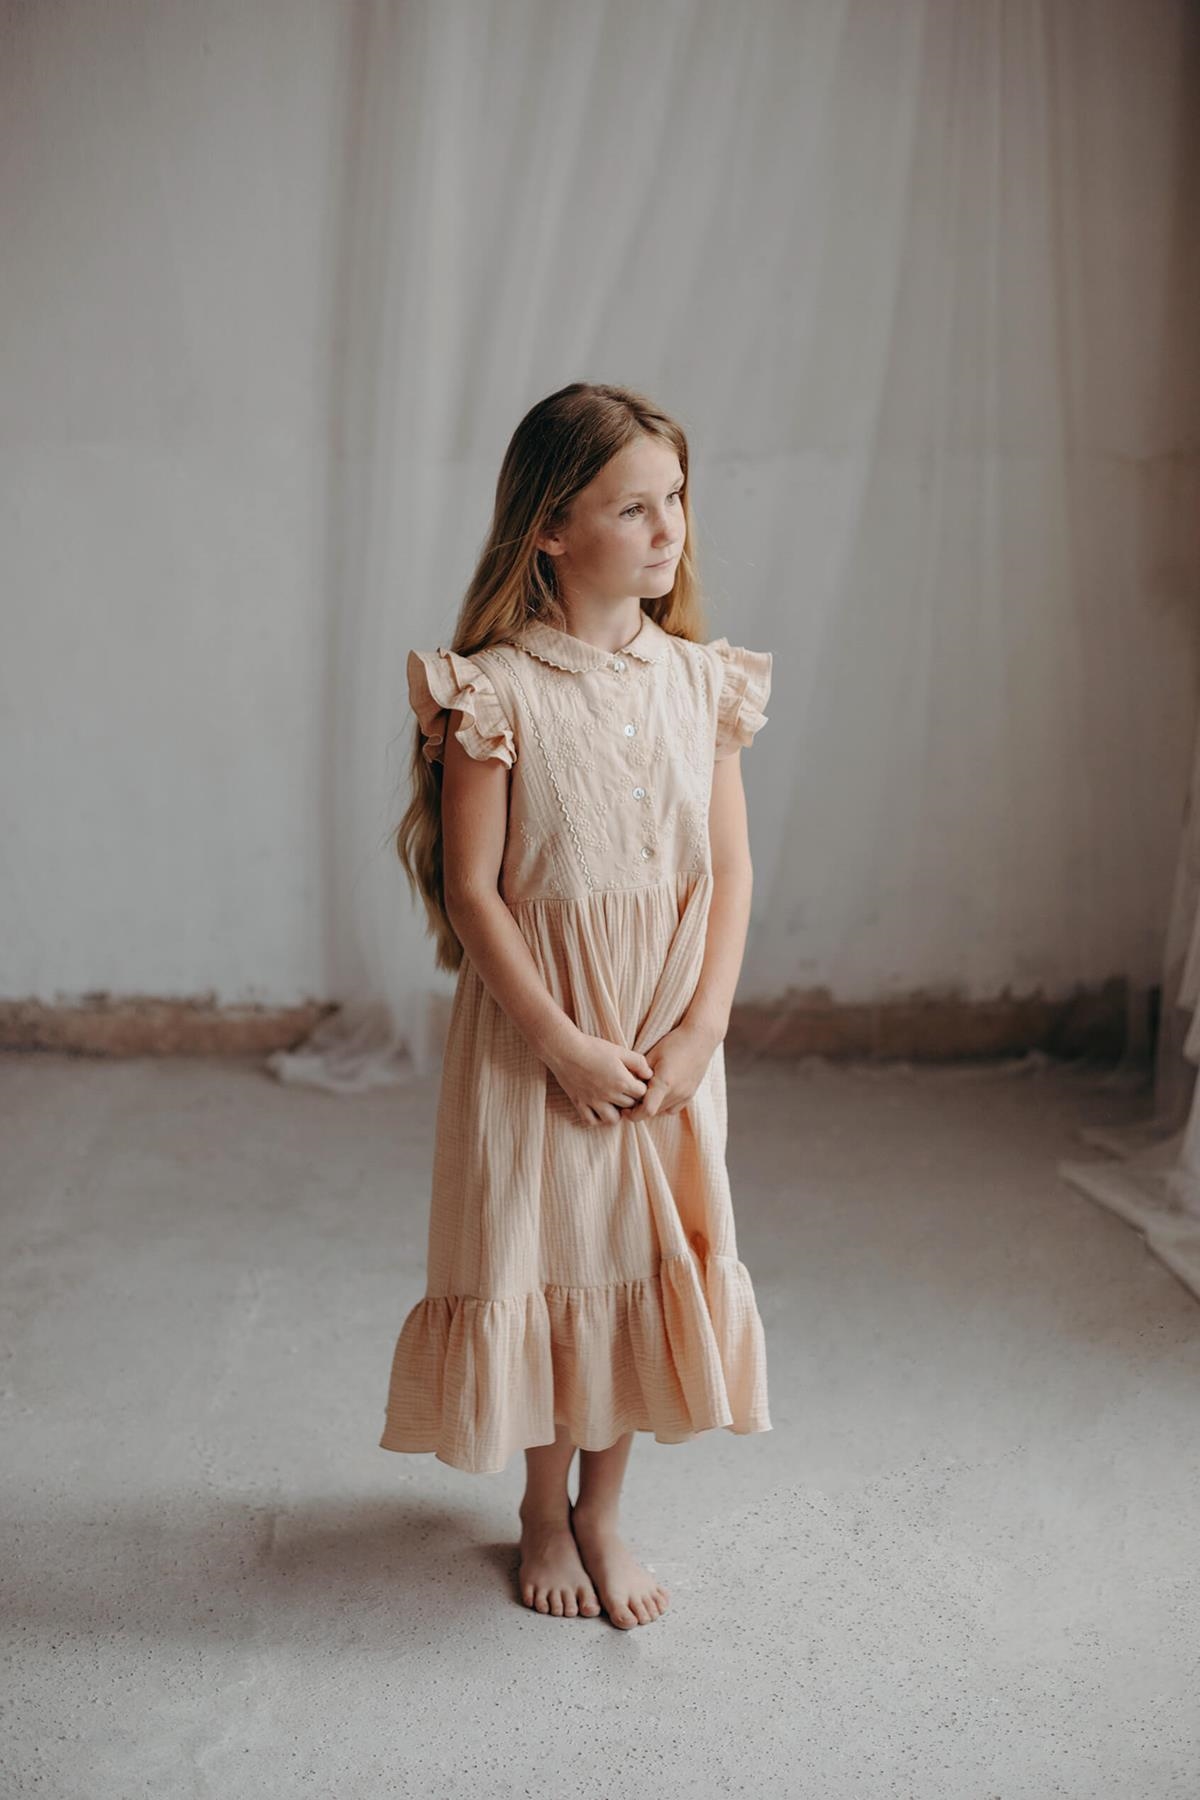 Mod.30.1 Organic pink dress with baby-style collar | SS23 Mod.30.1 Organic pink dress with baby-style collar